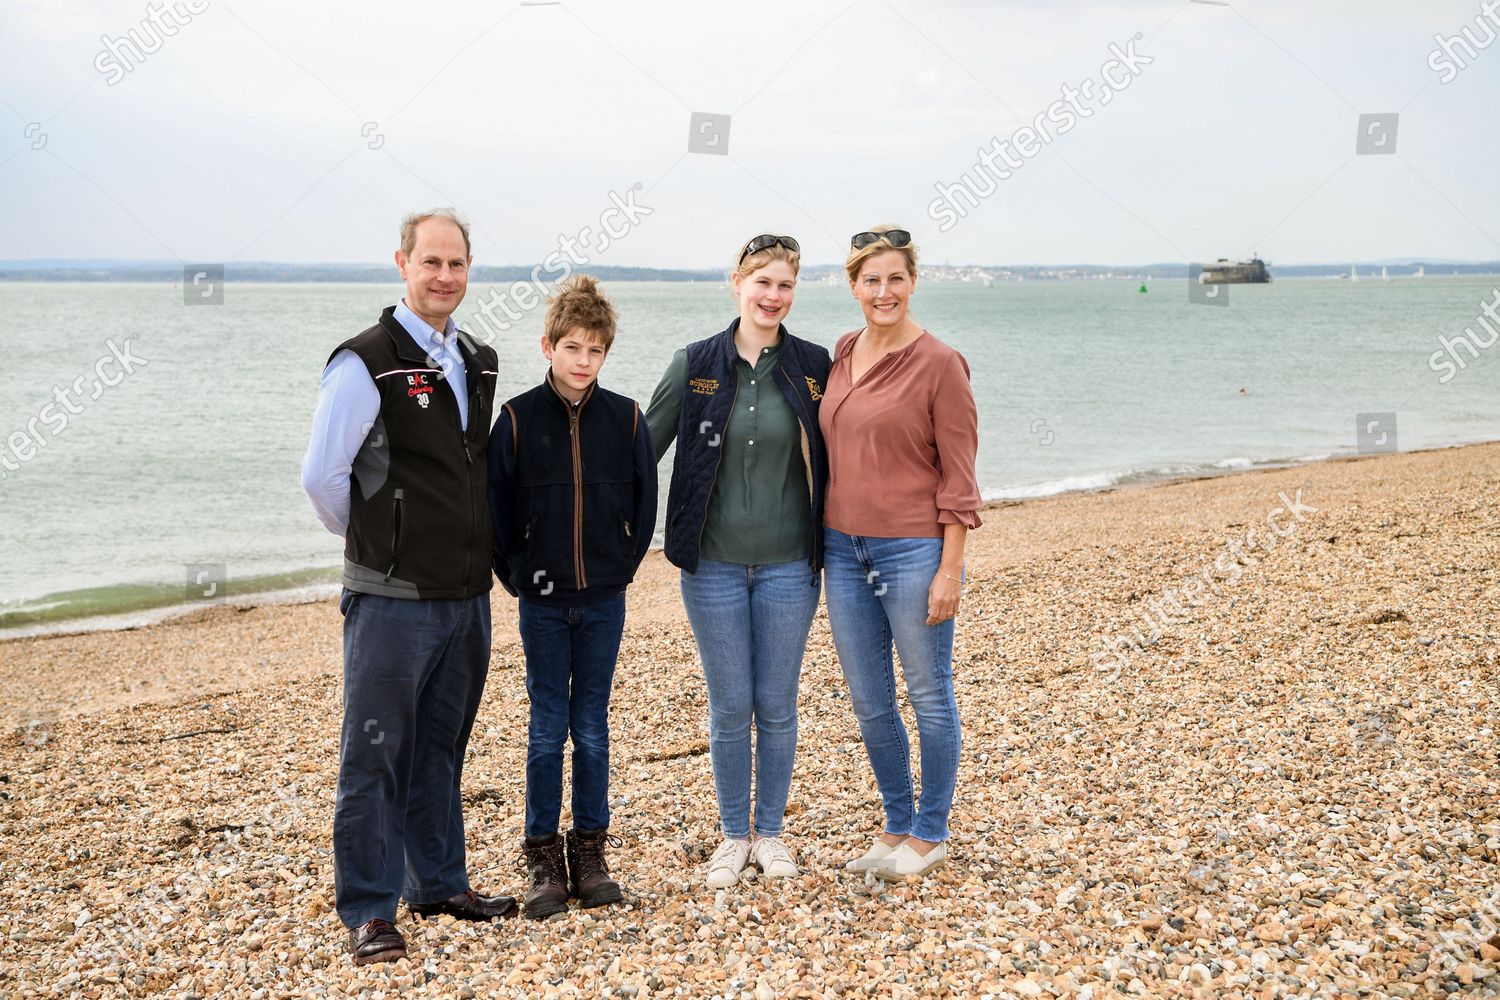 prince-edward-and-sophie-countess-of-wessex-great-british-beach-clean-southsea-beach-portsmouth-uk-shutterstock-editorial-10782998as.jpg